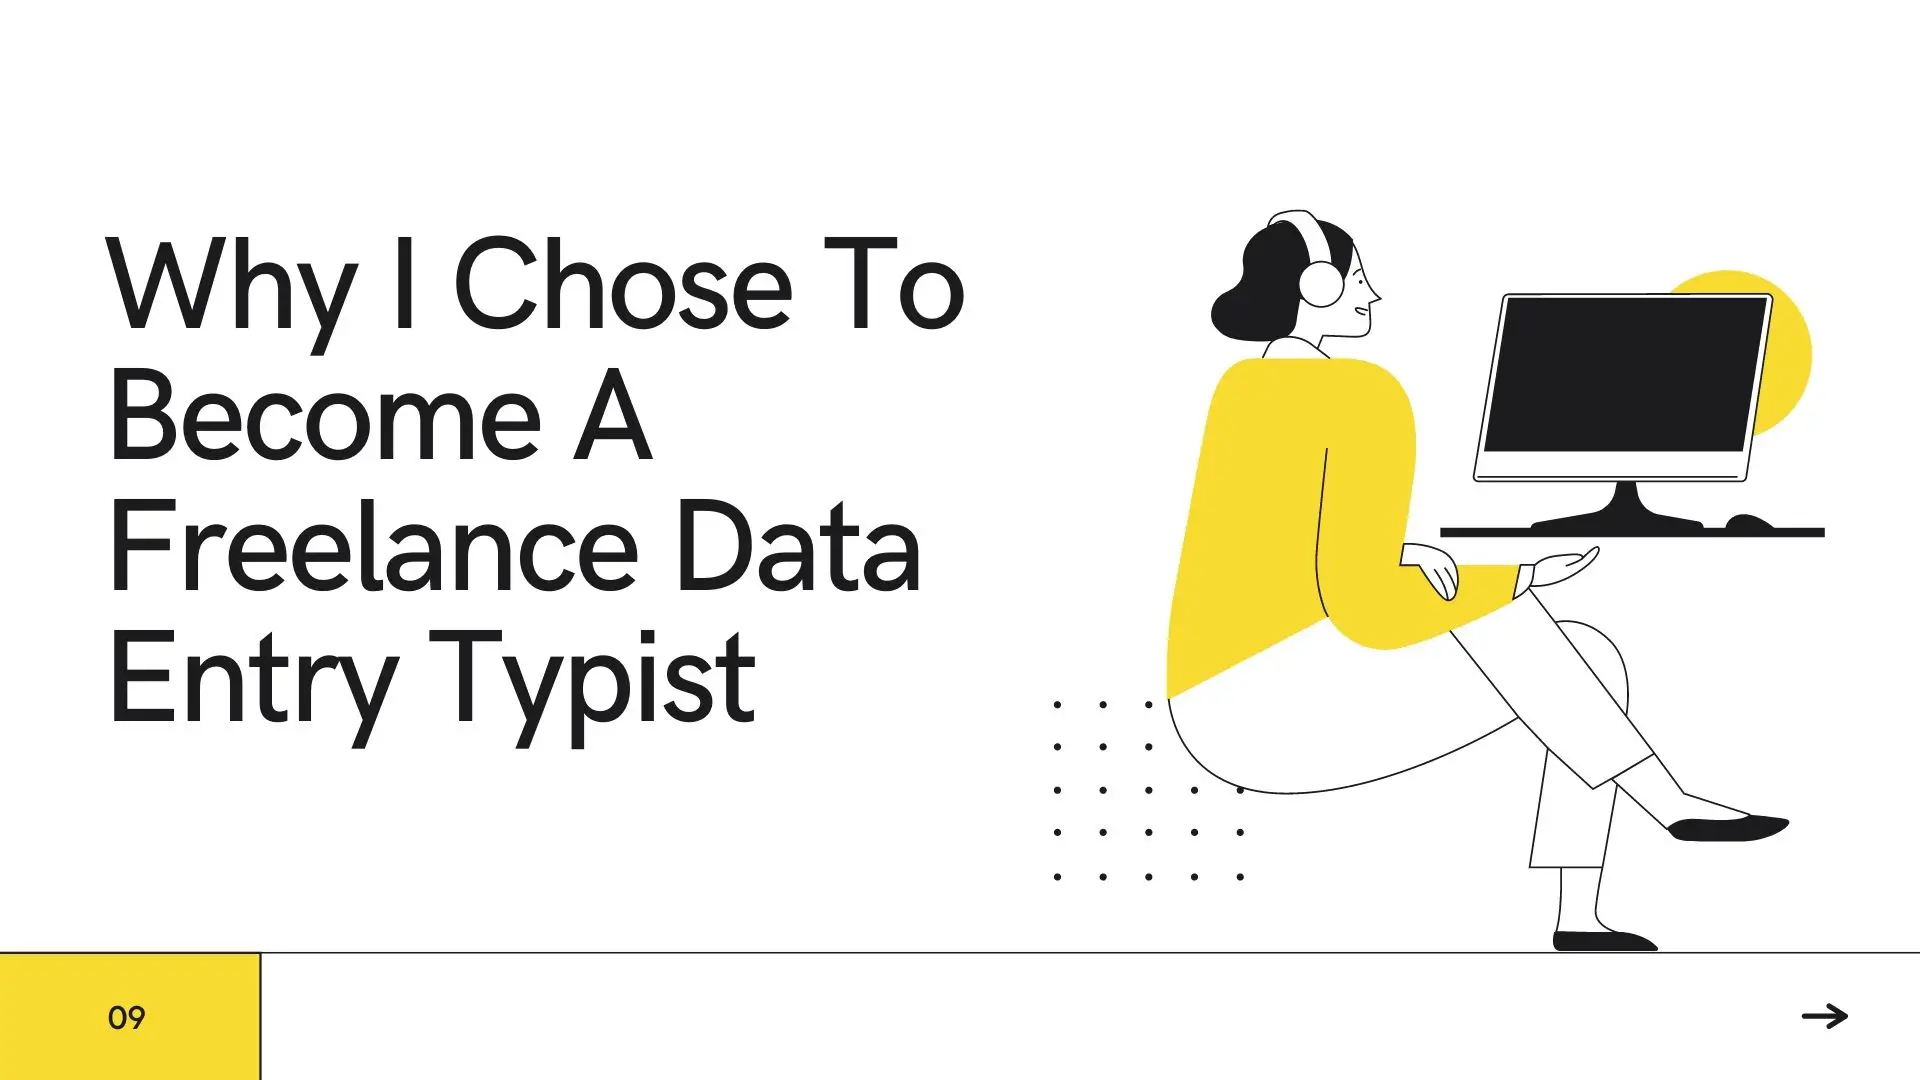 Why I Chose To Become A Freelance Data Entry Typist